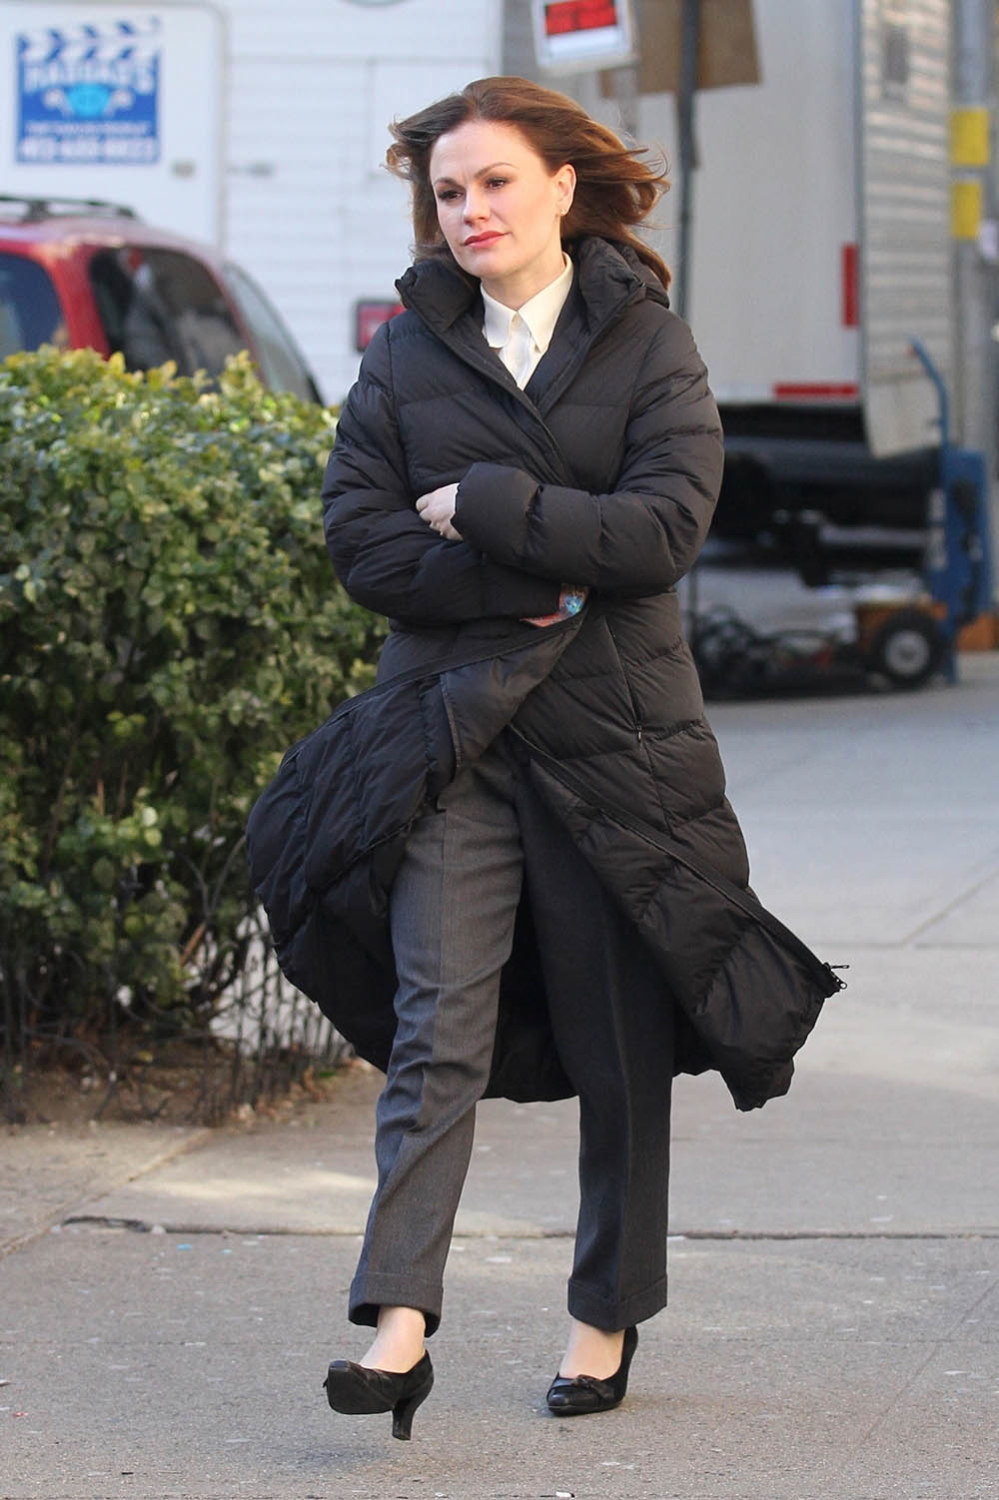 Anna Paquin on the set of The Irishman in NYC